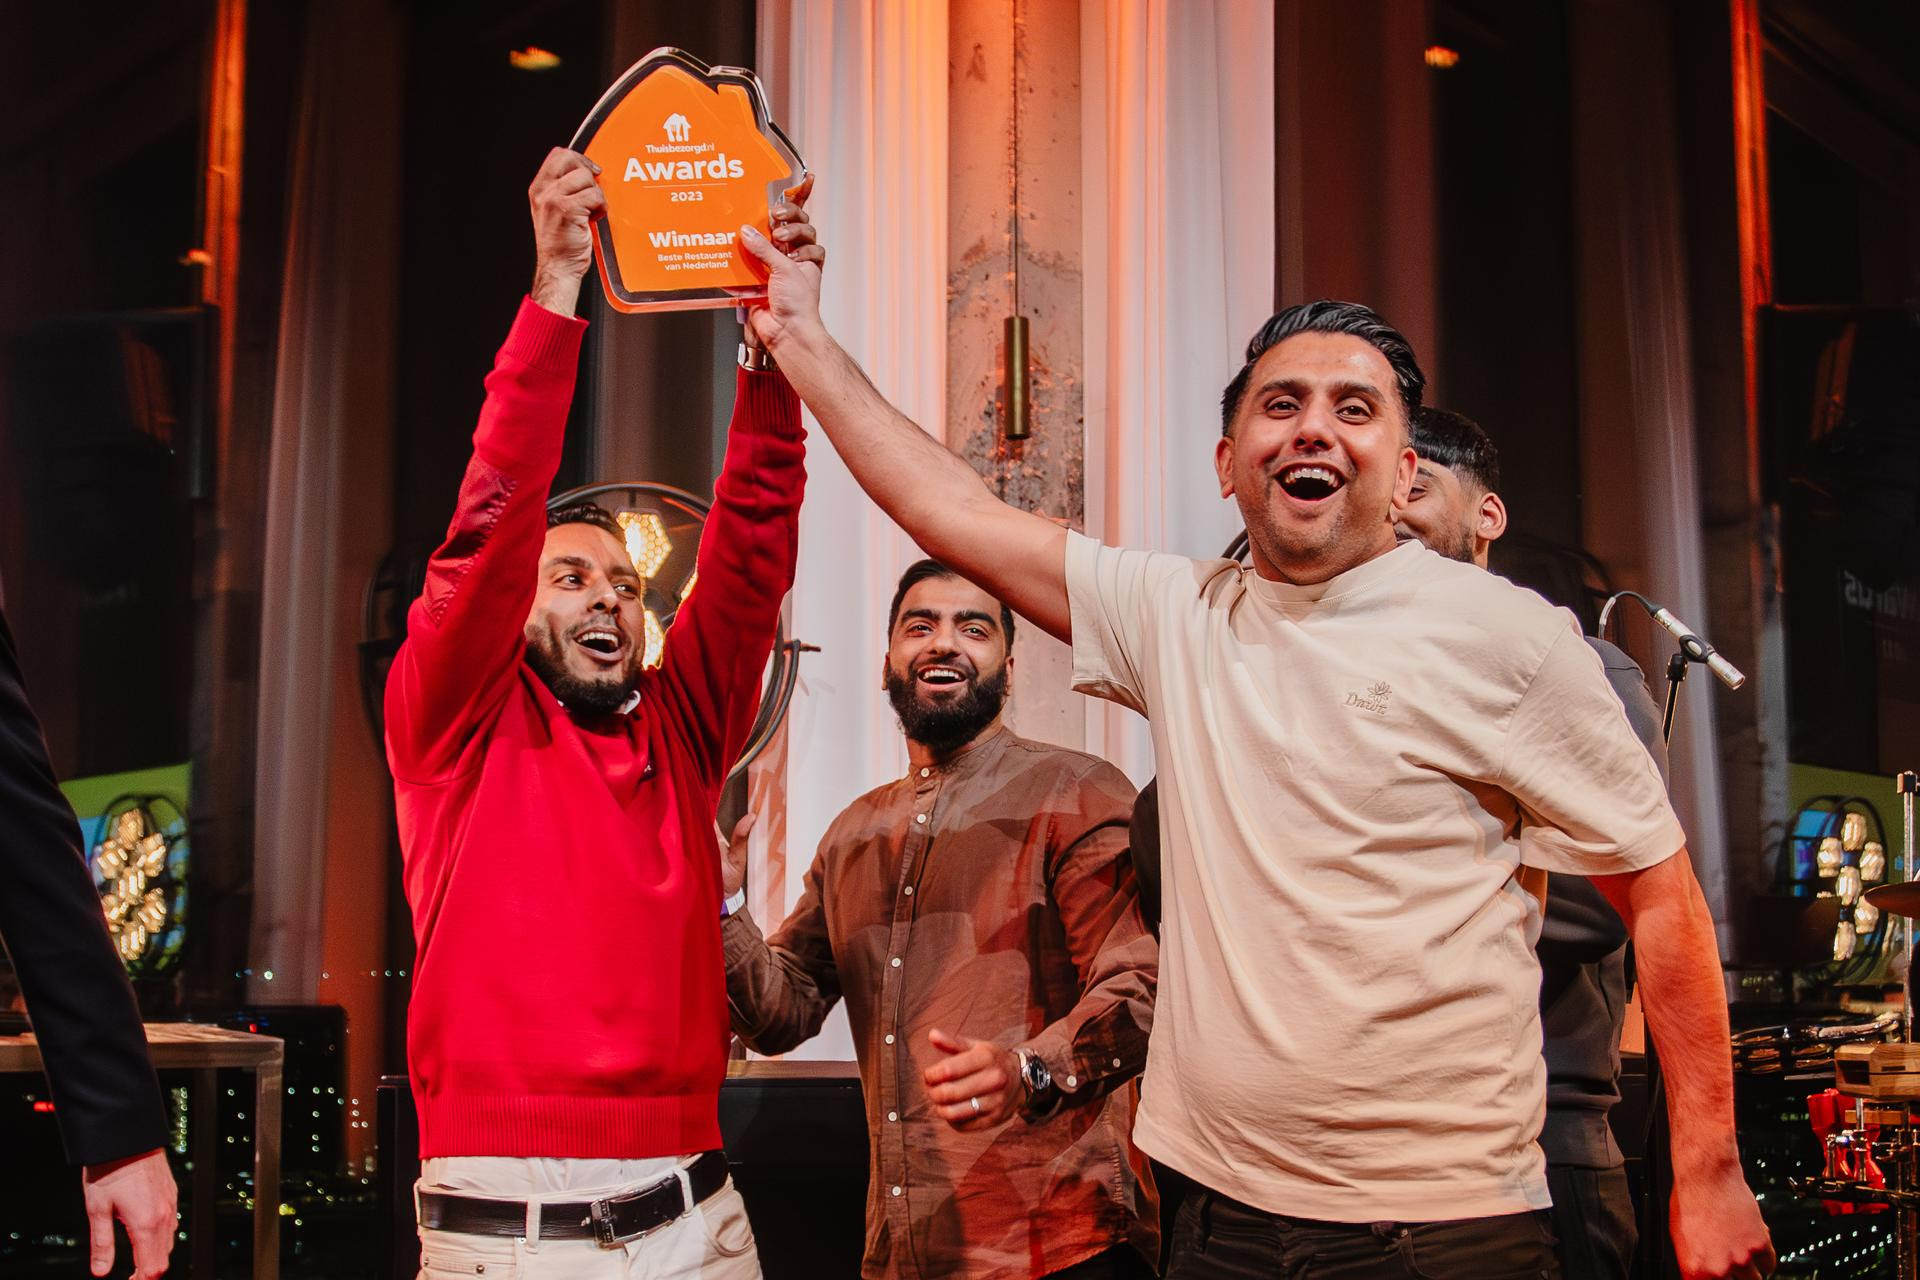 Owners of Burgers & Frites from Rotterdam holding the Thuisbezorgd.nl Award 2023 for Best Delivery Restaurant in the Netherlands and Best in Rotterdam. Photo credits: Fitchd